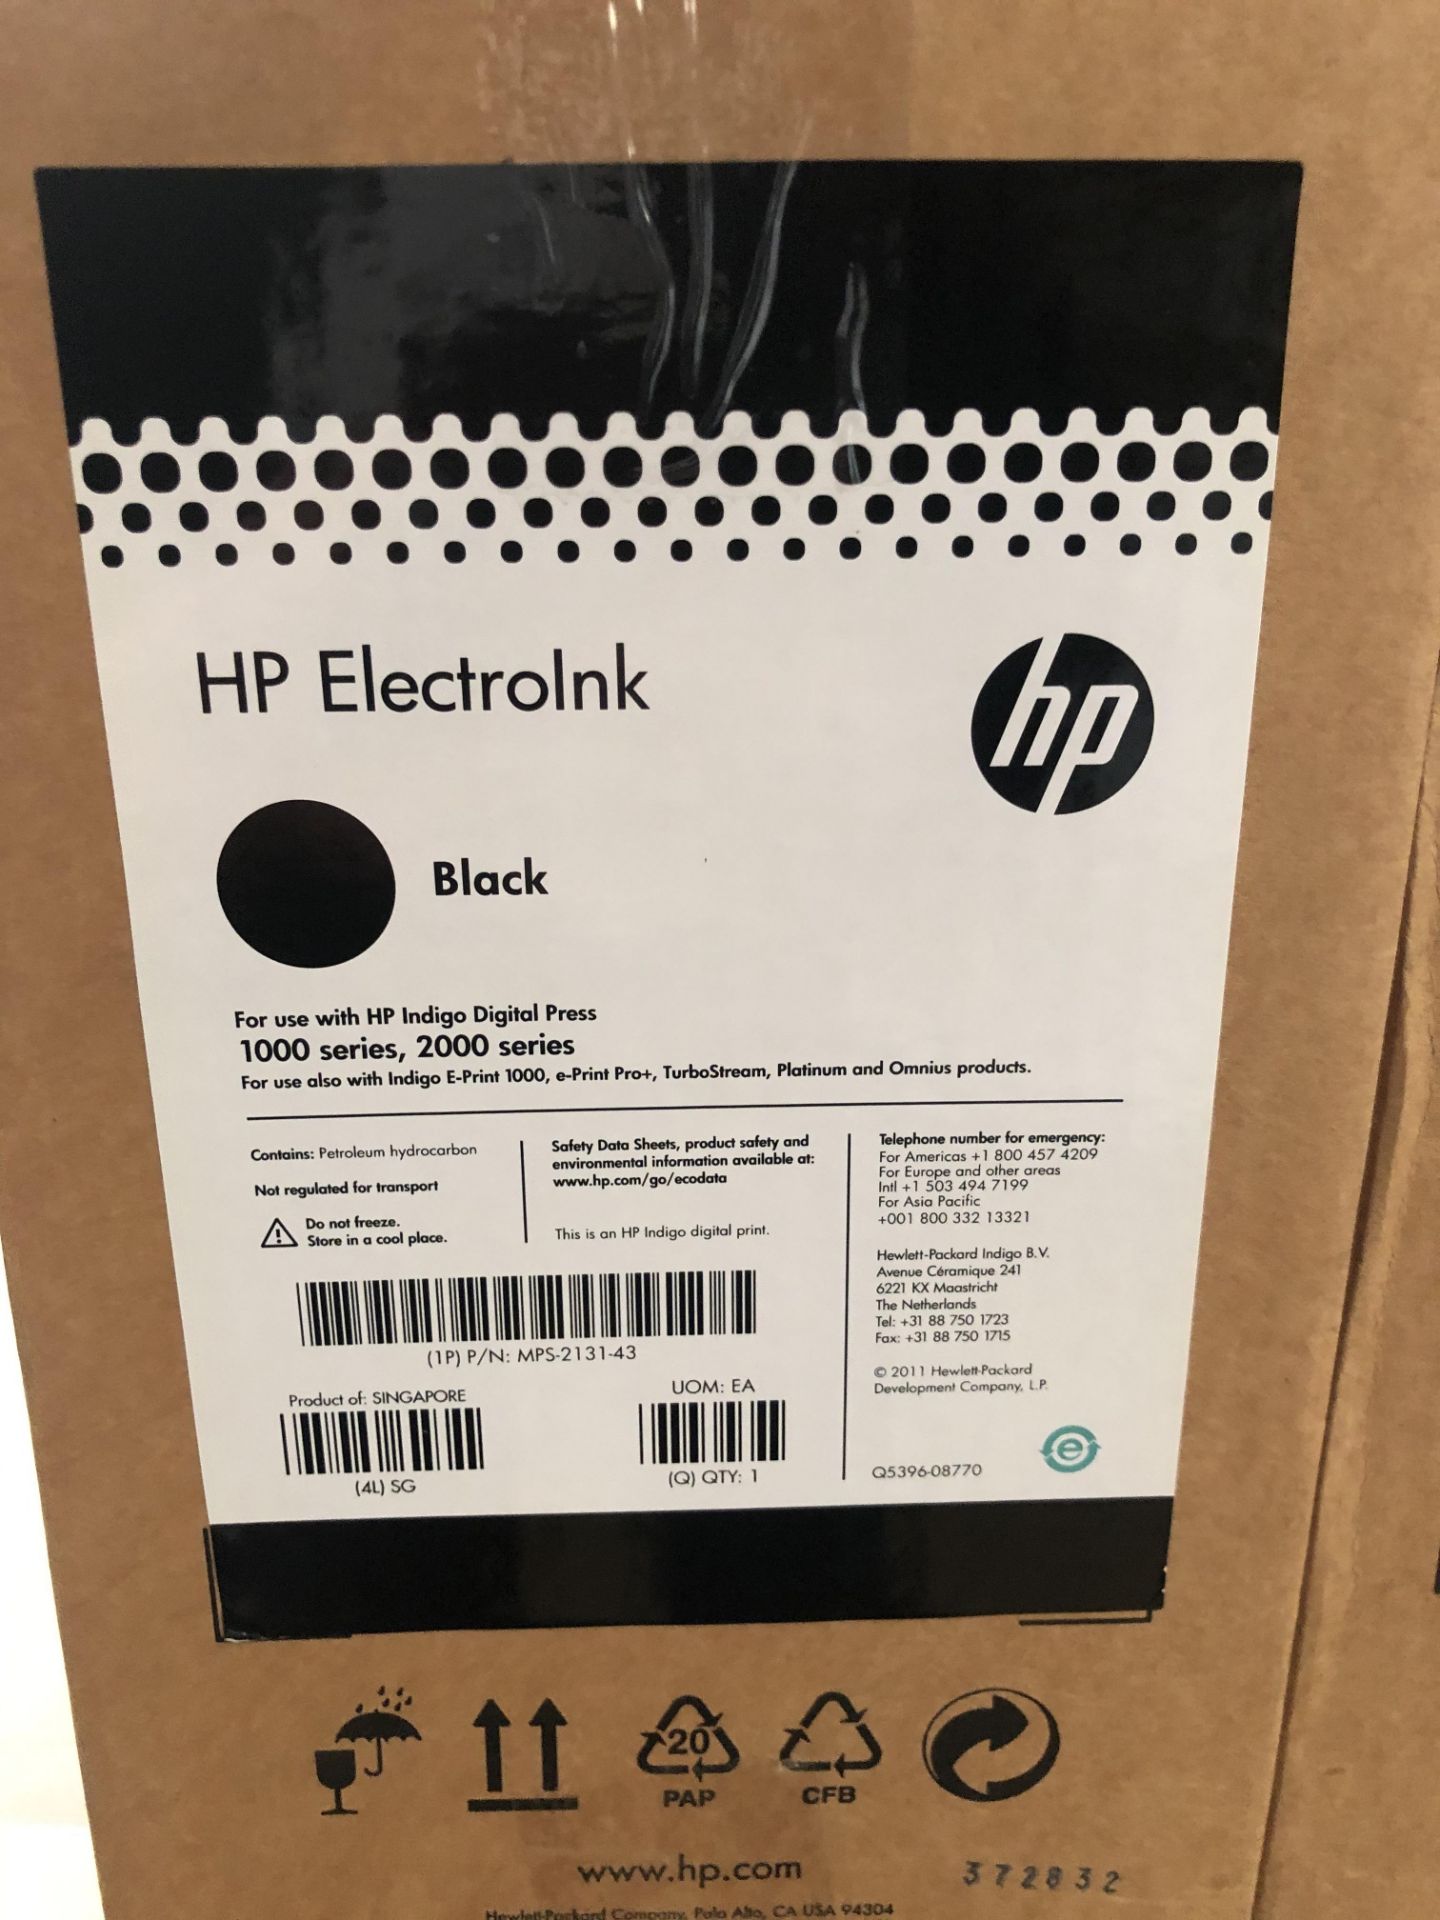 50 Cans of HP ElectroInk Black to suit HP Indigo Digital Press 1000 & 2000 Series (to 5 boxes) ( - Bild 2 aus 2